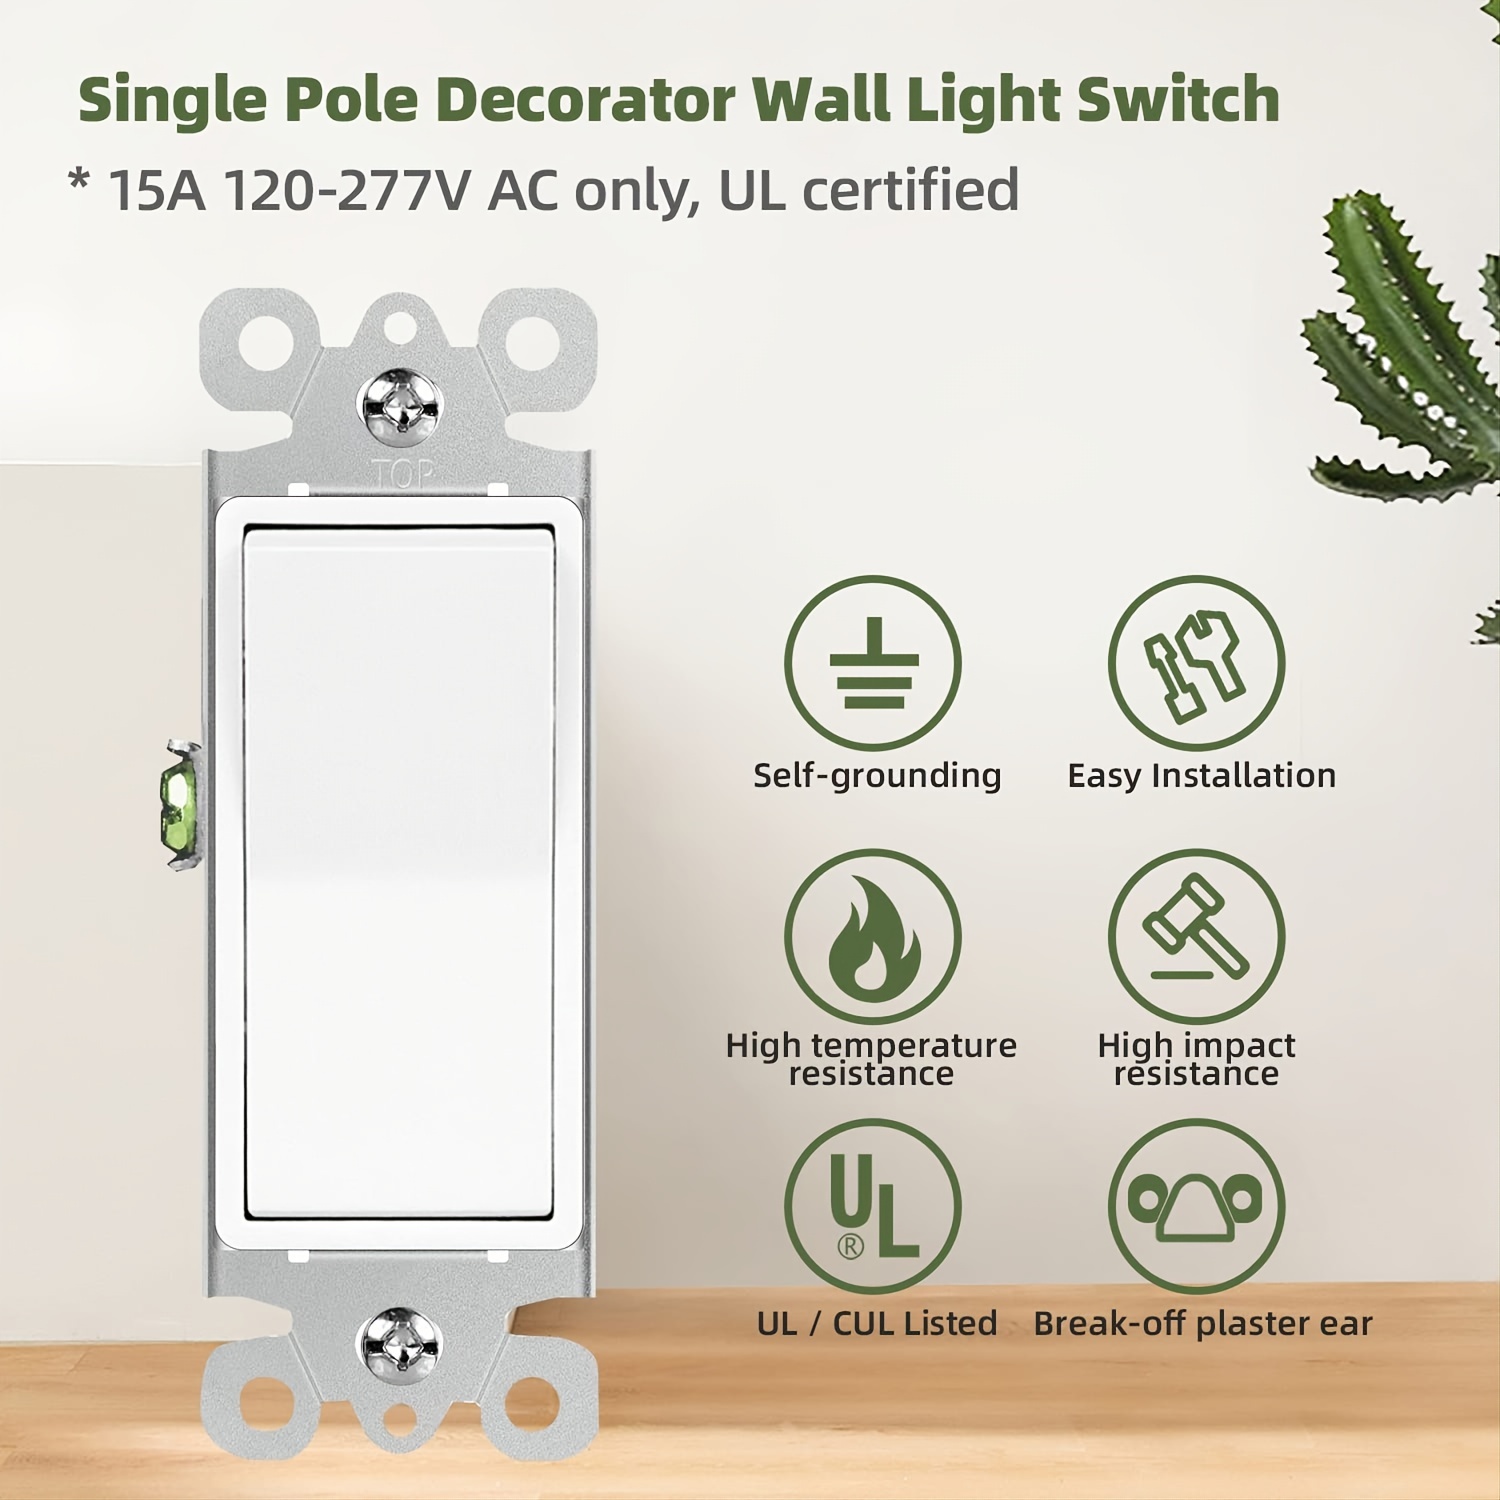 30 Pack BESTTEN Single Pole Wall Light Switch with Wallplate, 15A 120 277V, Decorator On Off Rocker Paddle Interrupter, UL Listed, White - 4